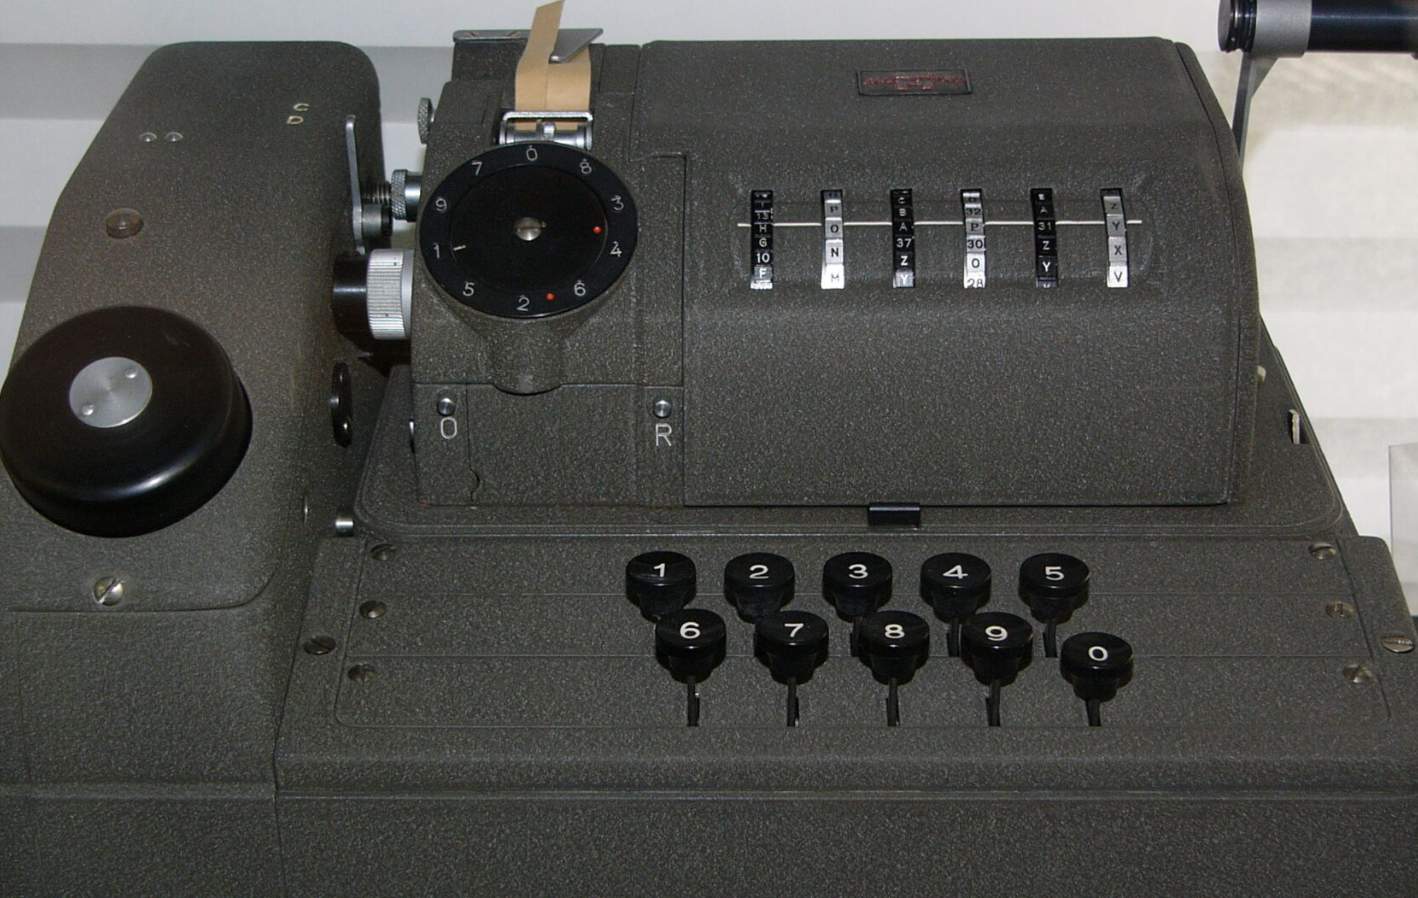 Hegelin’s inventions included the portable M-209 cipher machine 